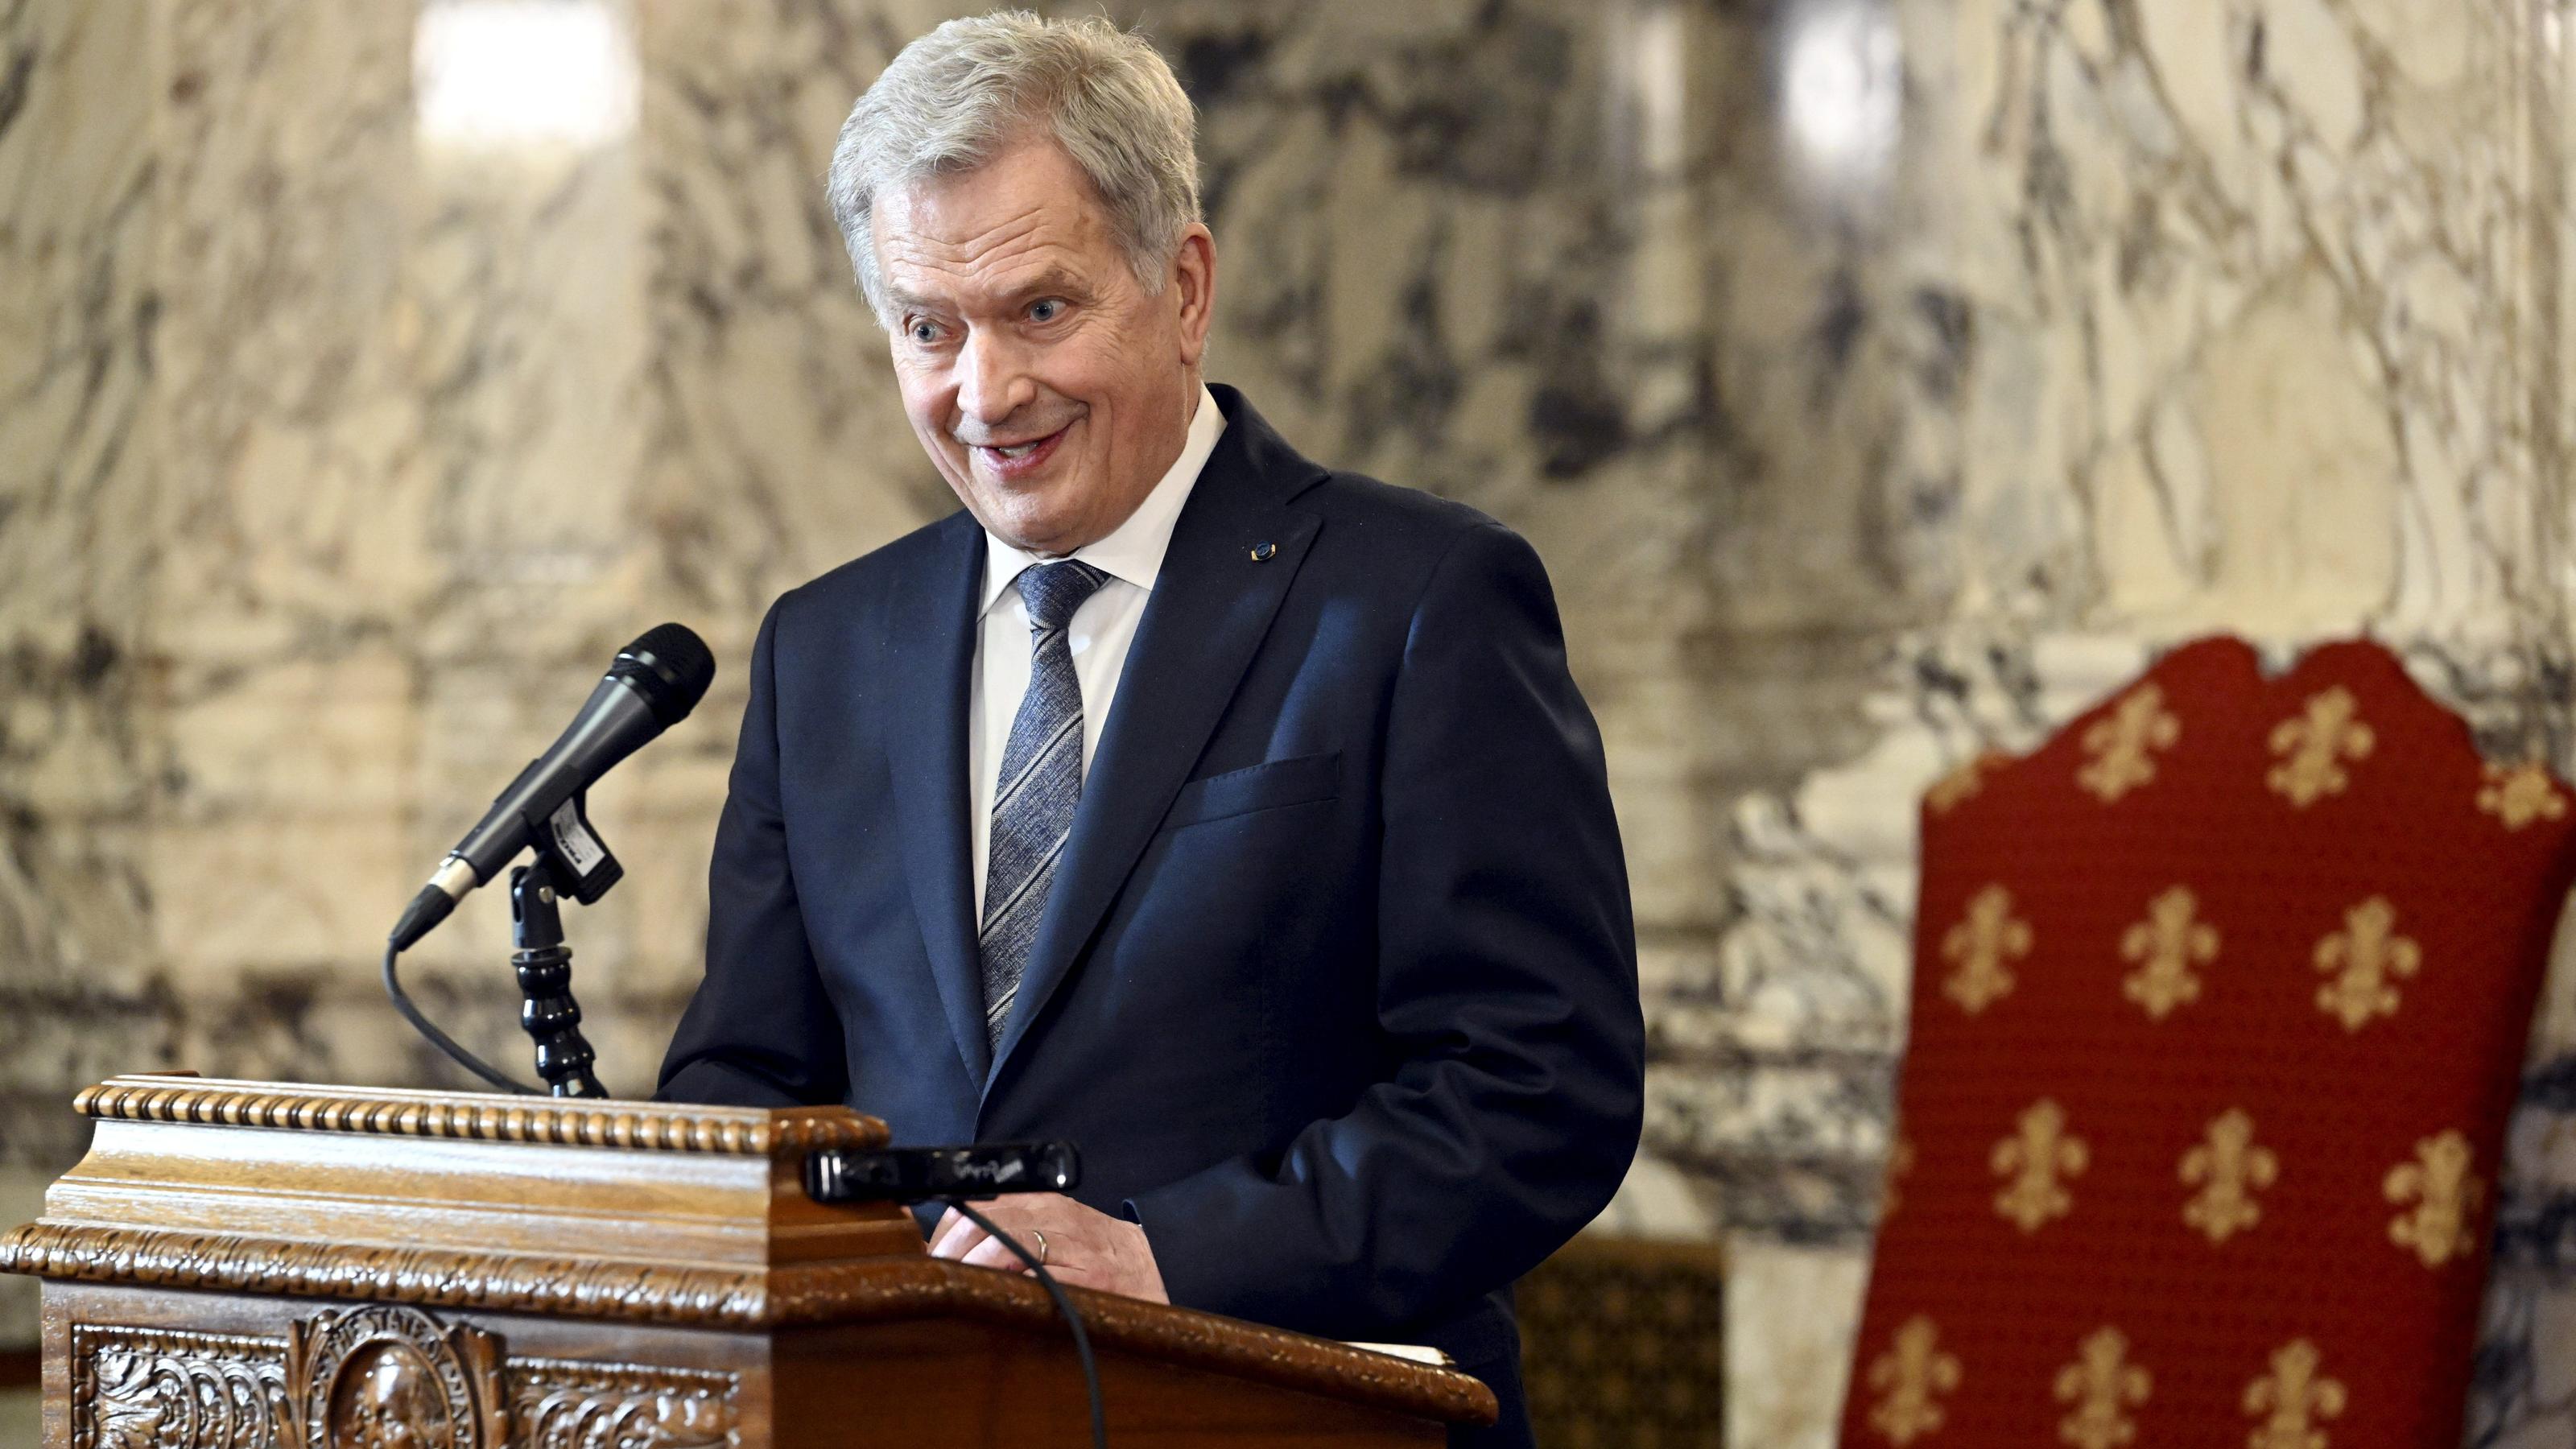 President of Finland Sauli Niinistö holds a press conference during his visit to the Washington State Capitol Building in Olympia, USA, on March 6, 2023. Finnish President Niinistö is on a 5-days visit to the United States. LEHTIKUVA / HEIKKI SAUKKOM